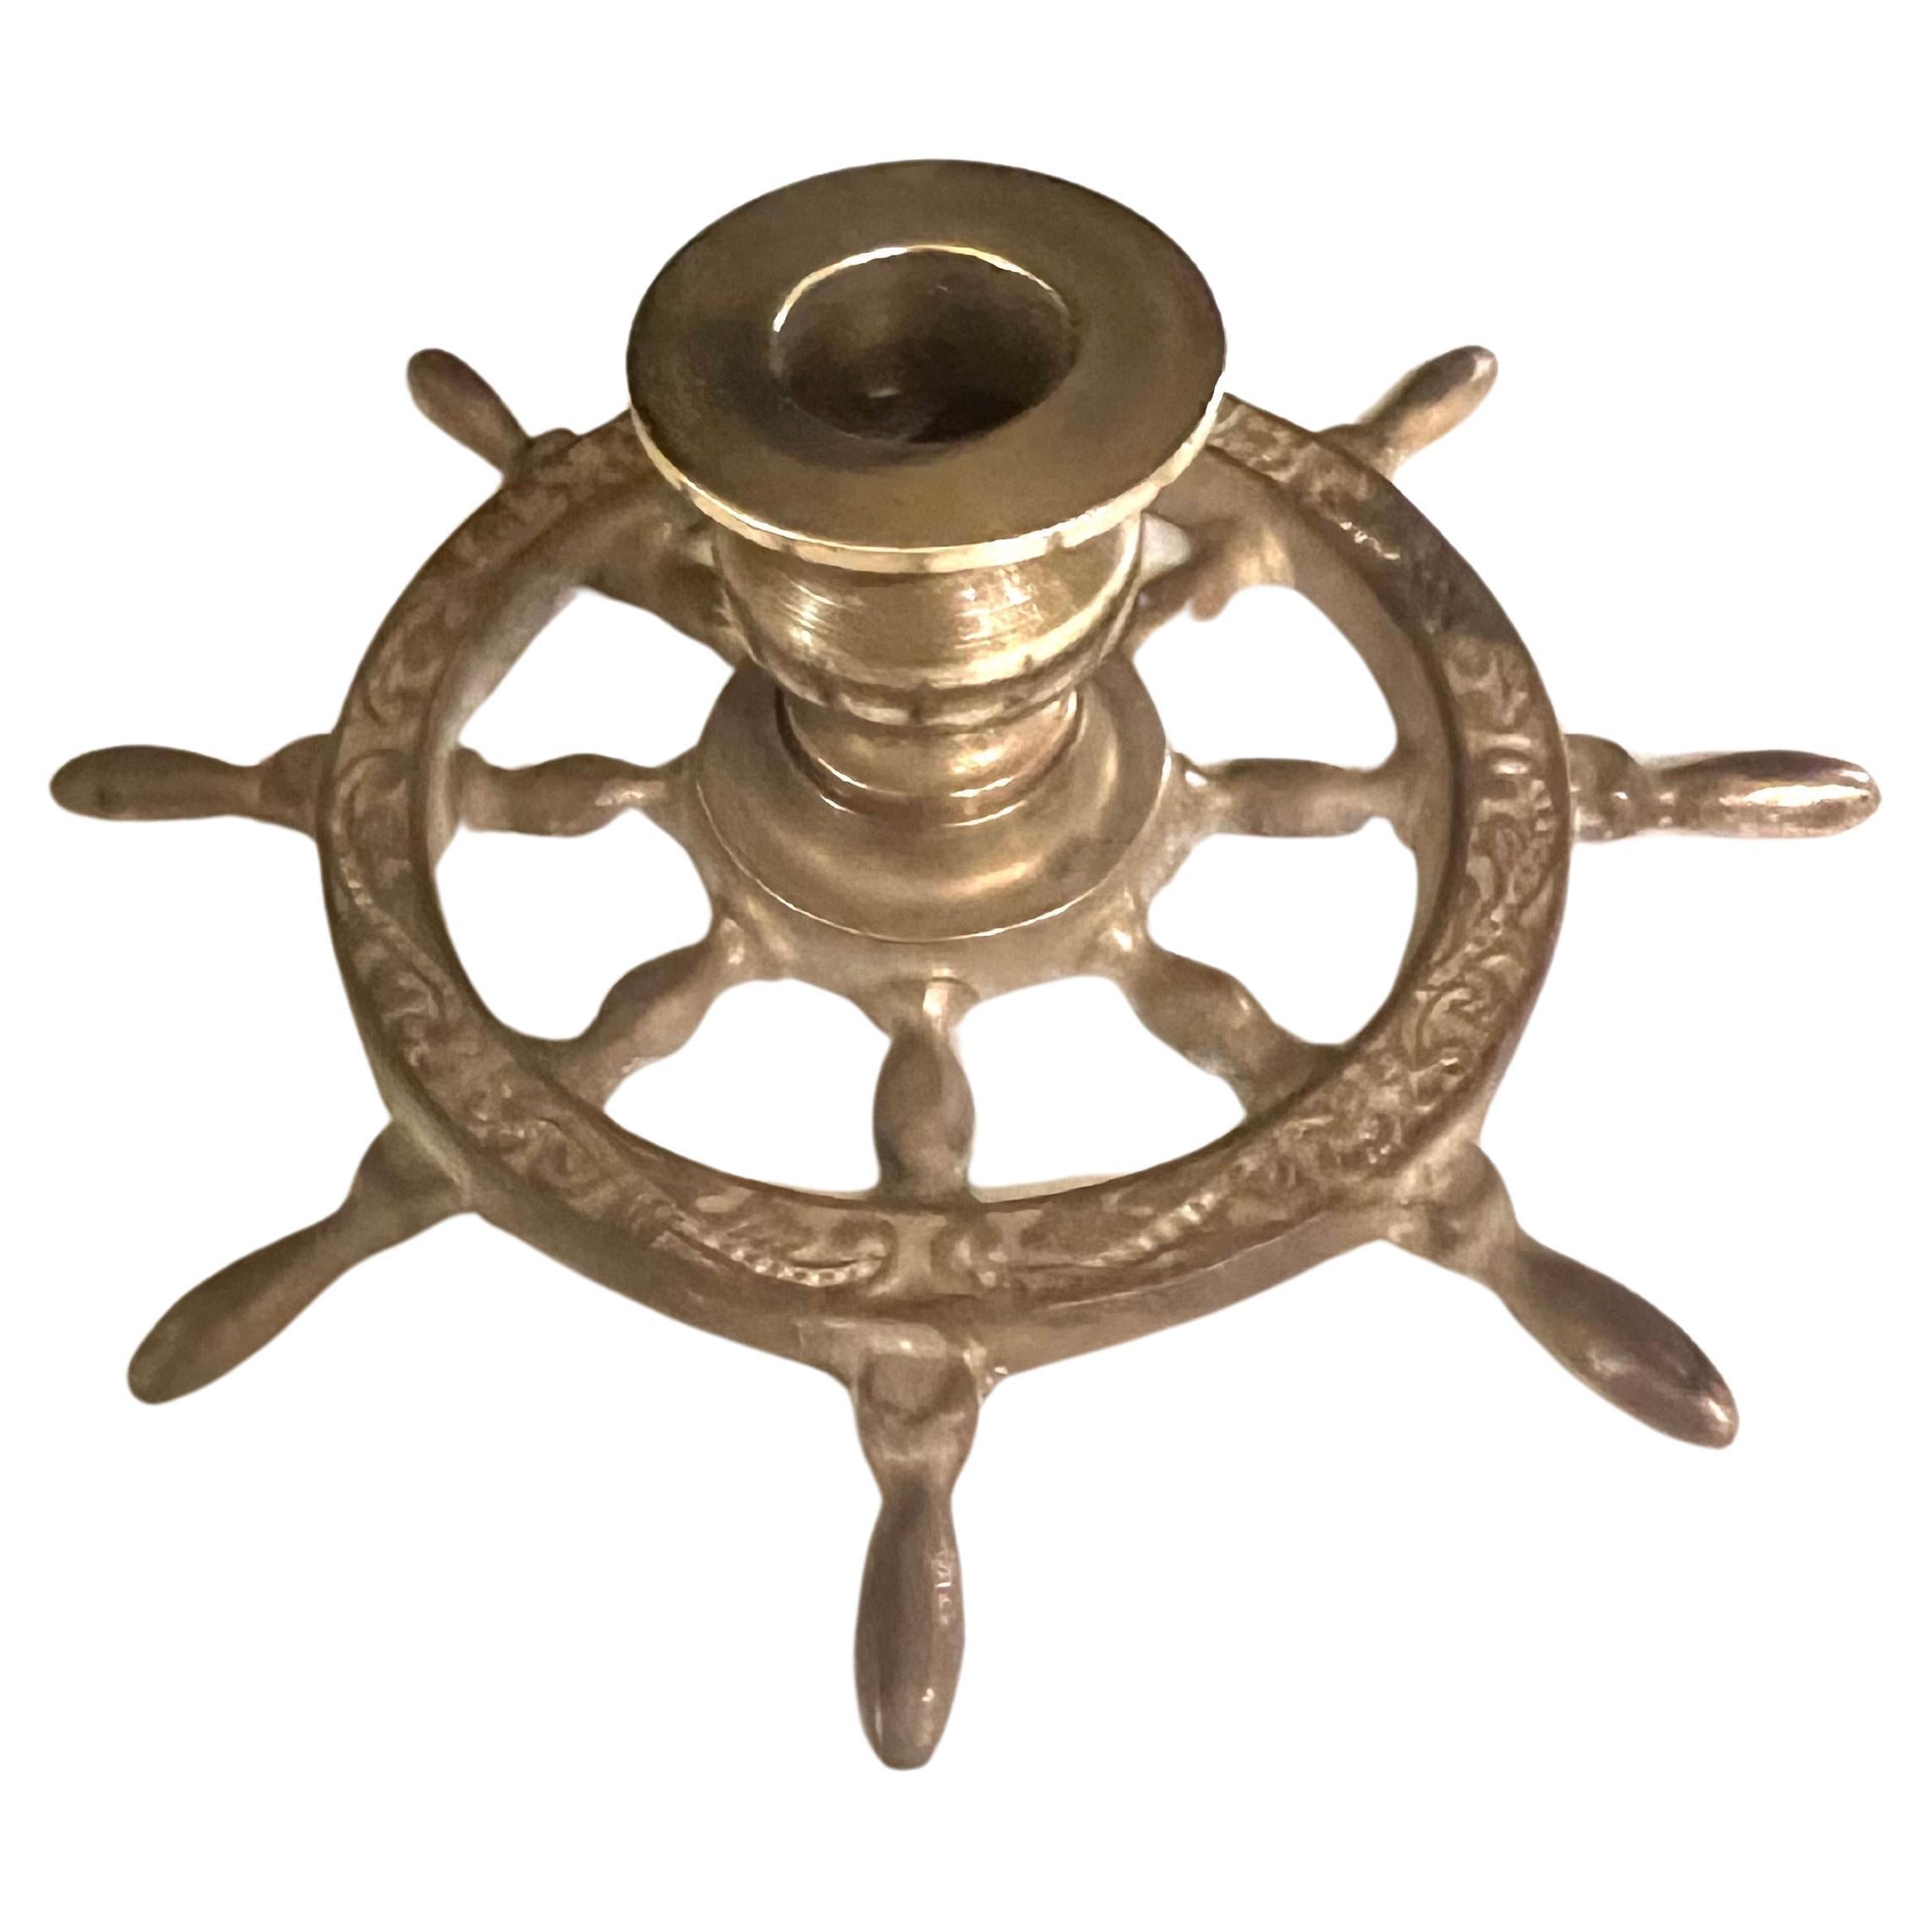 Whimsical pair of solid brass Stering nautical wheels, circa 1970's perfect desktop items the ashtray rotates all solid polished brass with a nice patina.